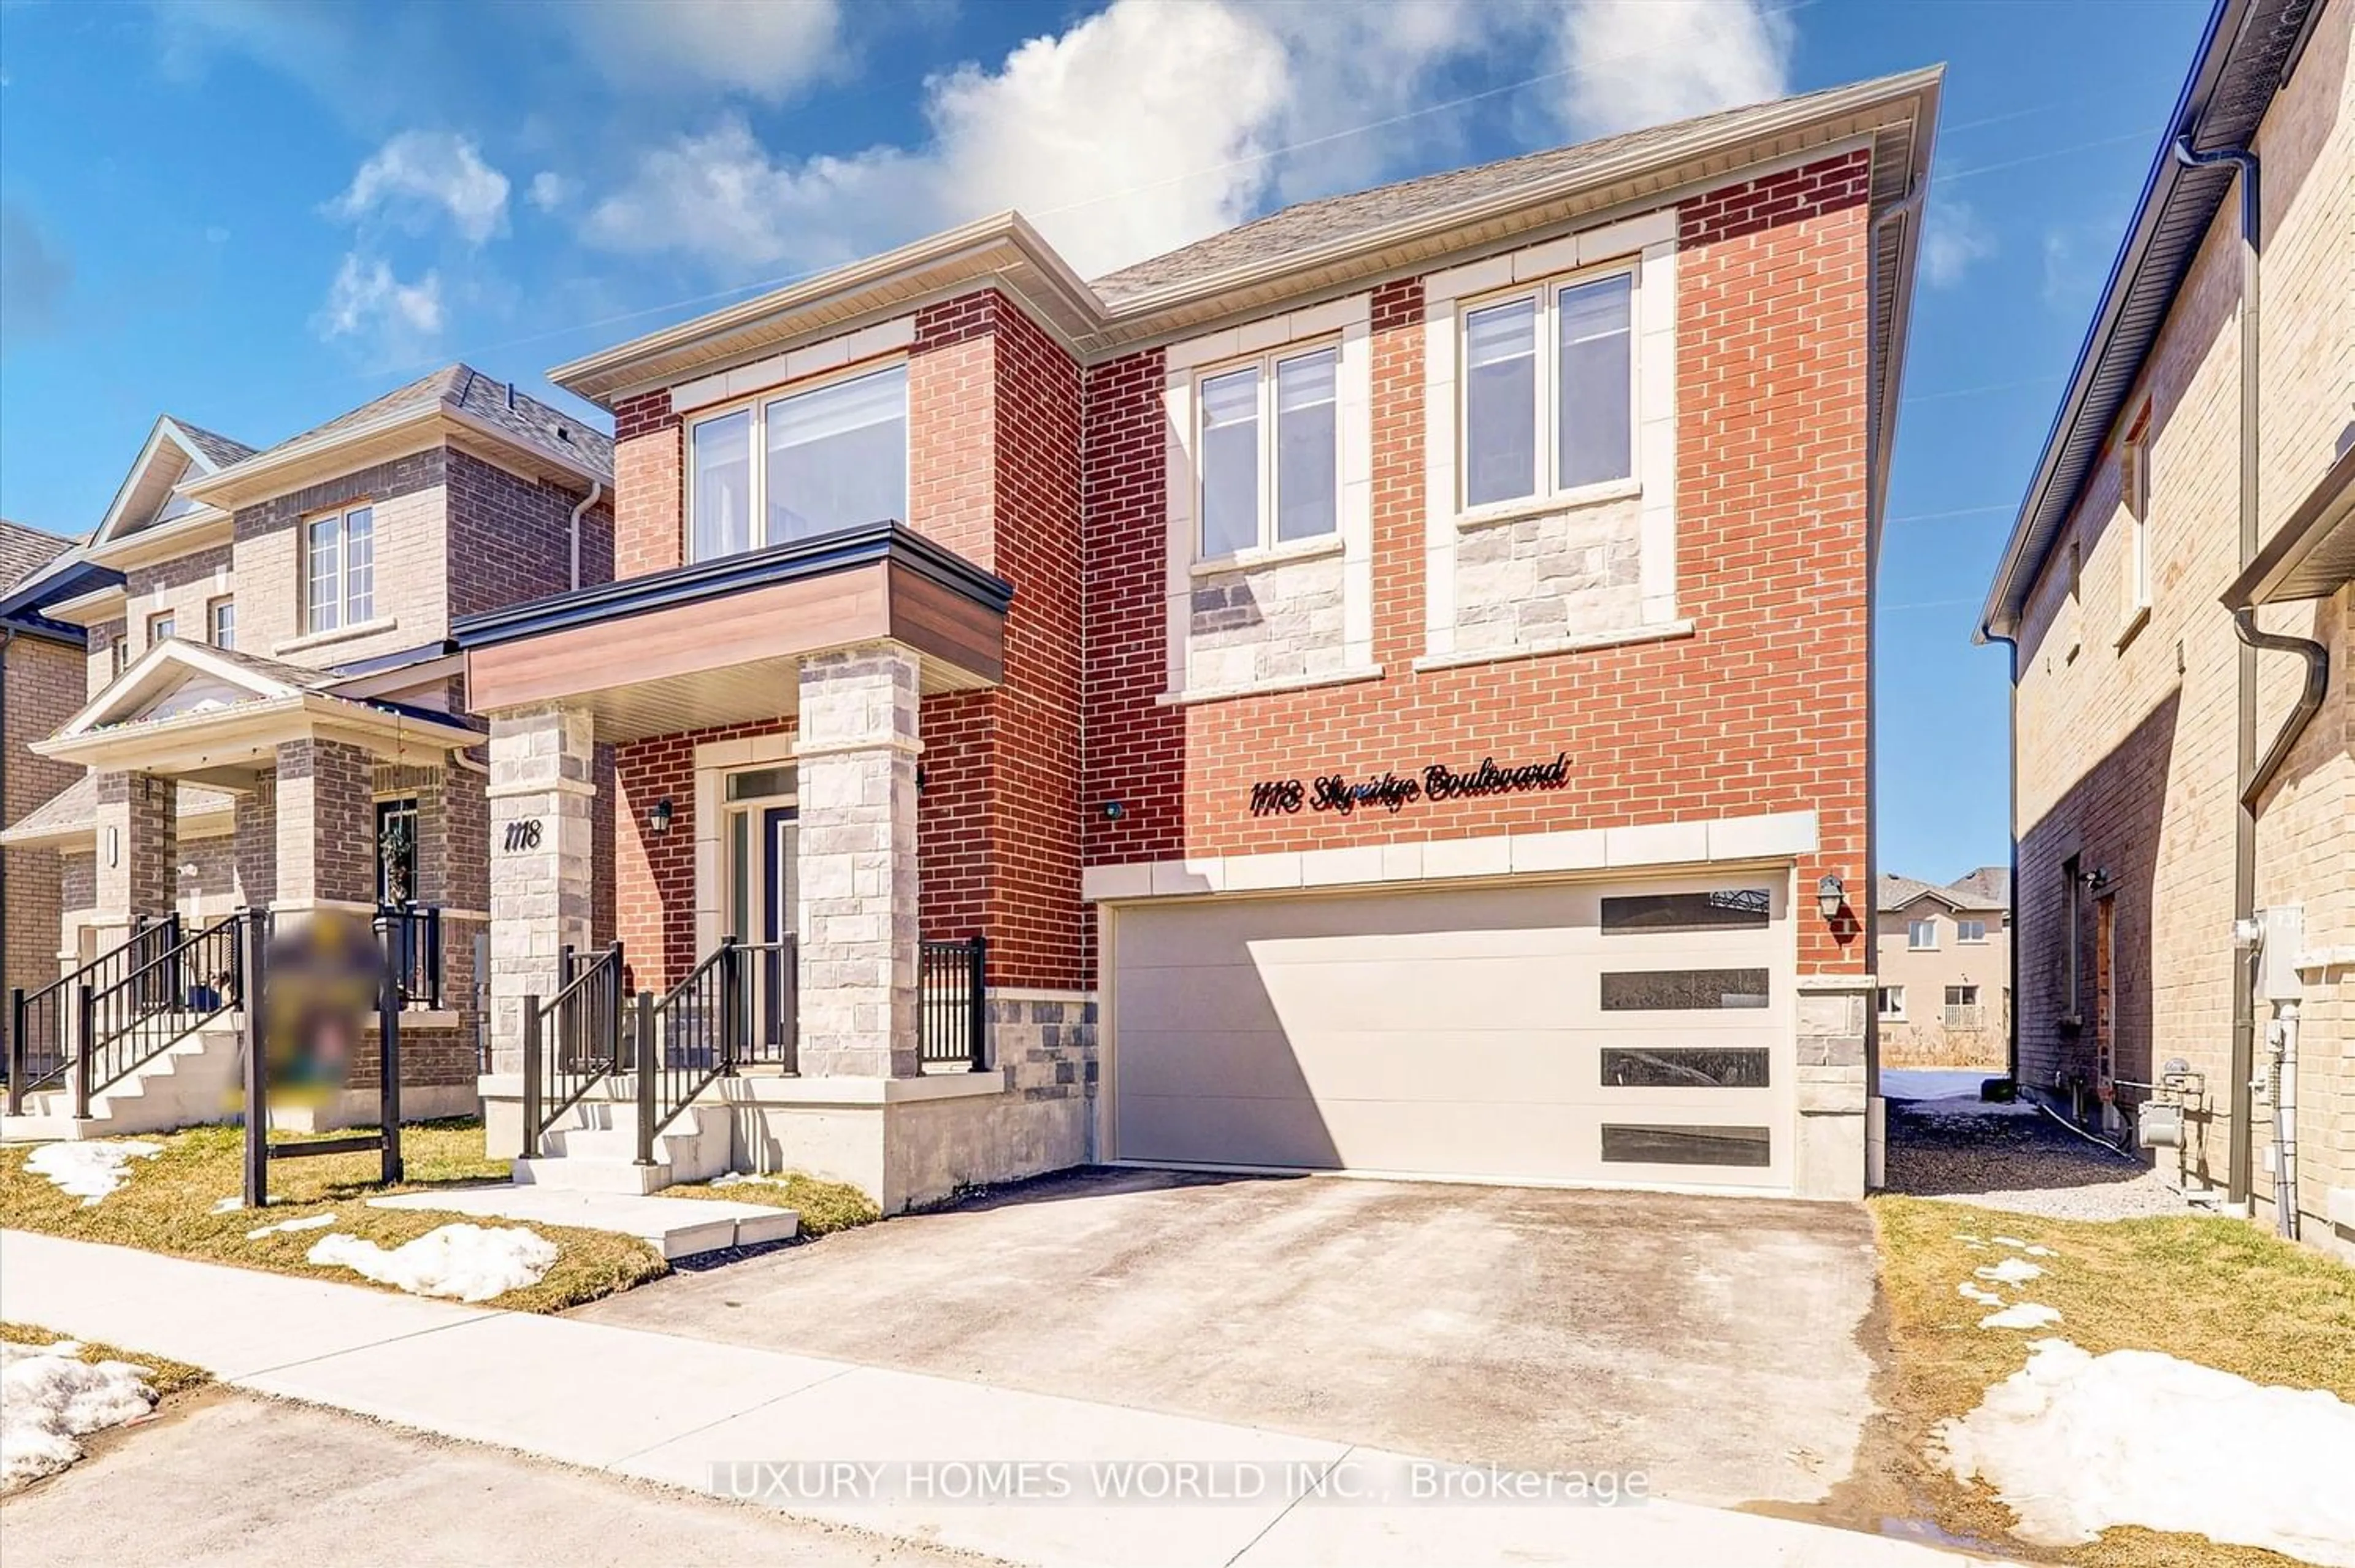 Home with brick exterior material for 1118 Skyridge Blvd, Pickering Ontario L1X 0M8